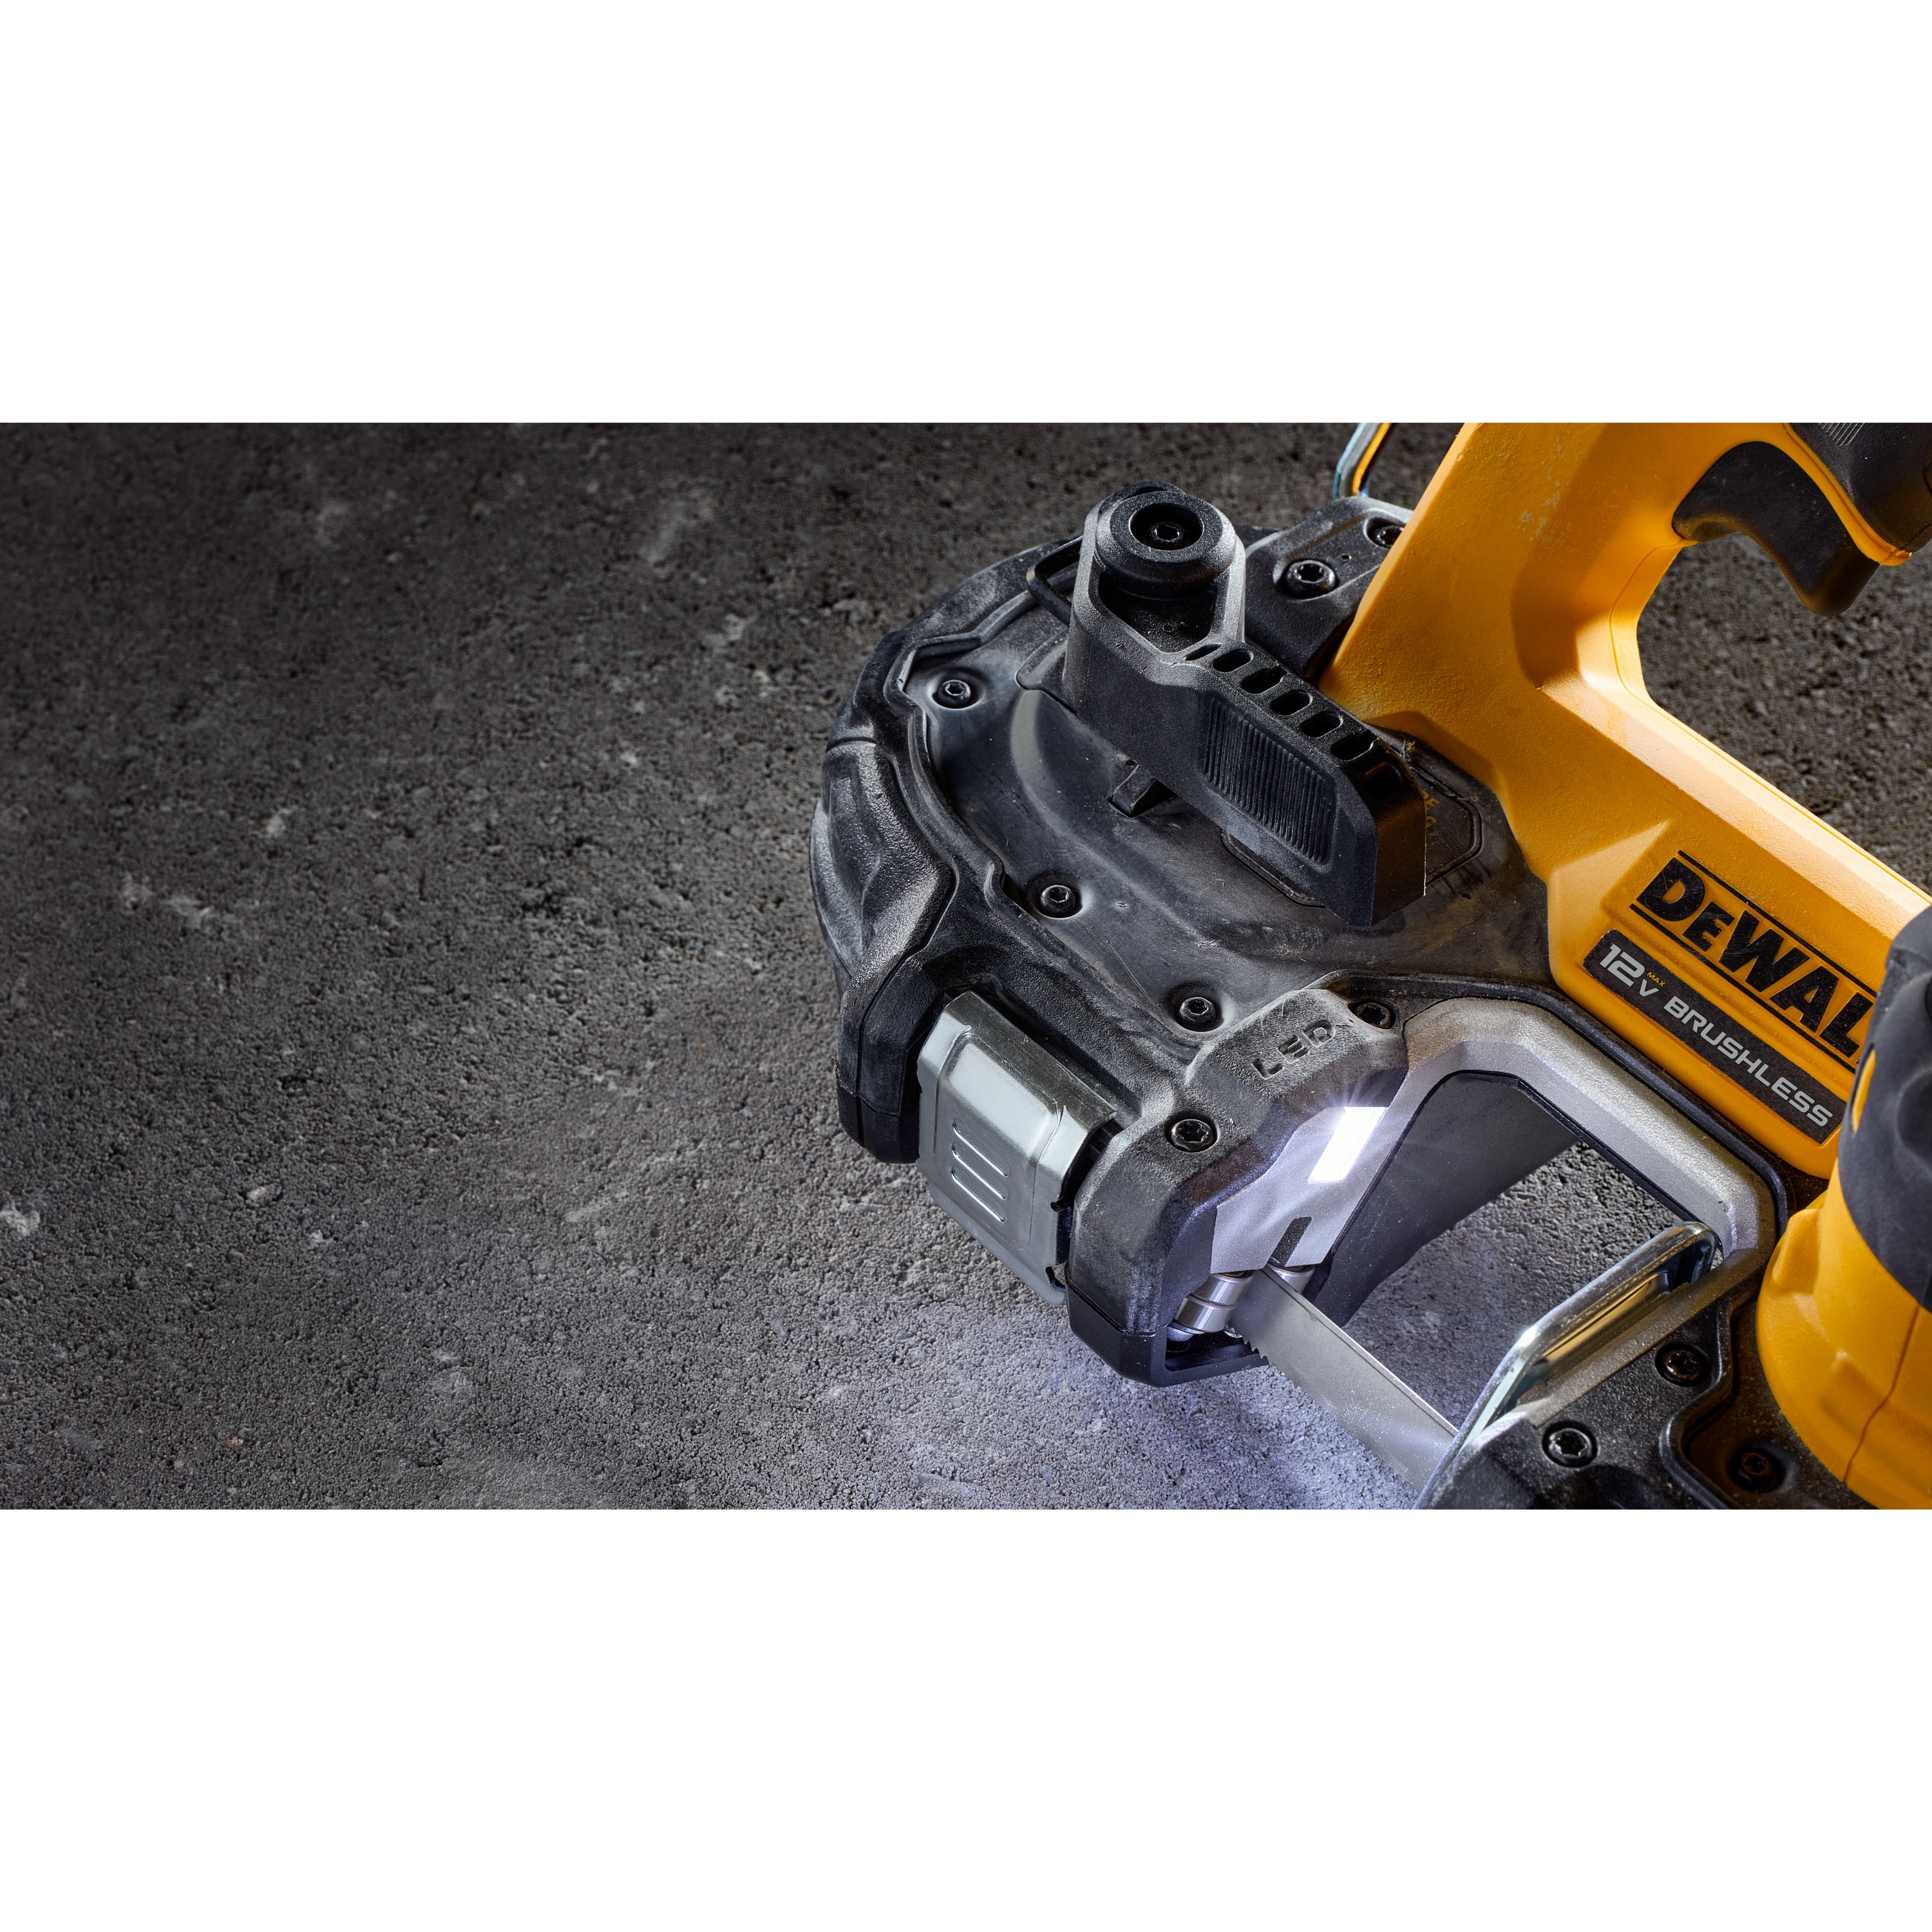 Quick tool free blade change feature Xtreme 12 volt 1 and three quarter inch brushless cordless band saw tool.